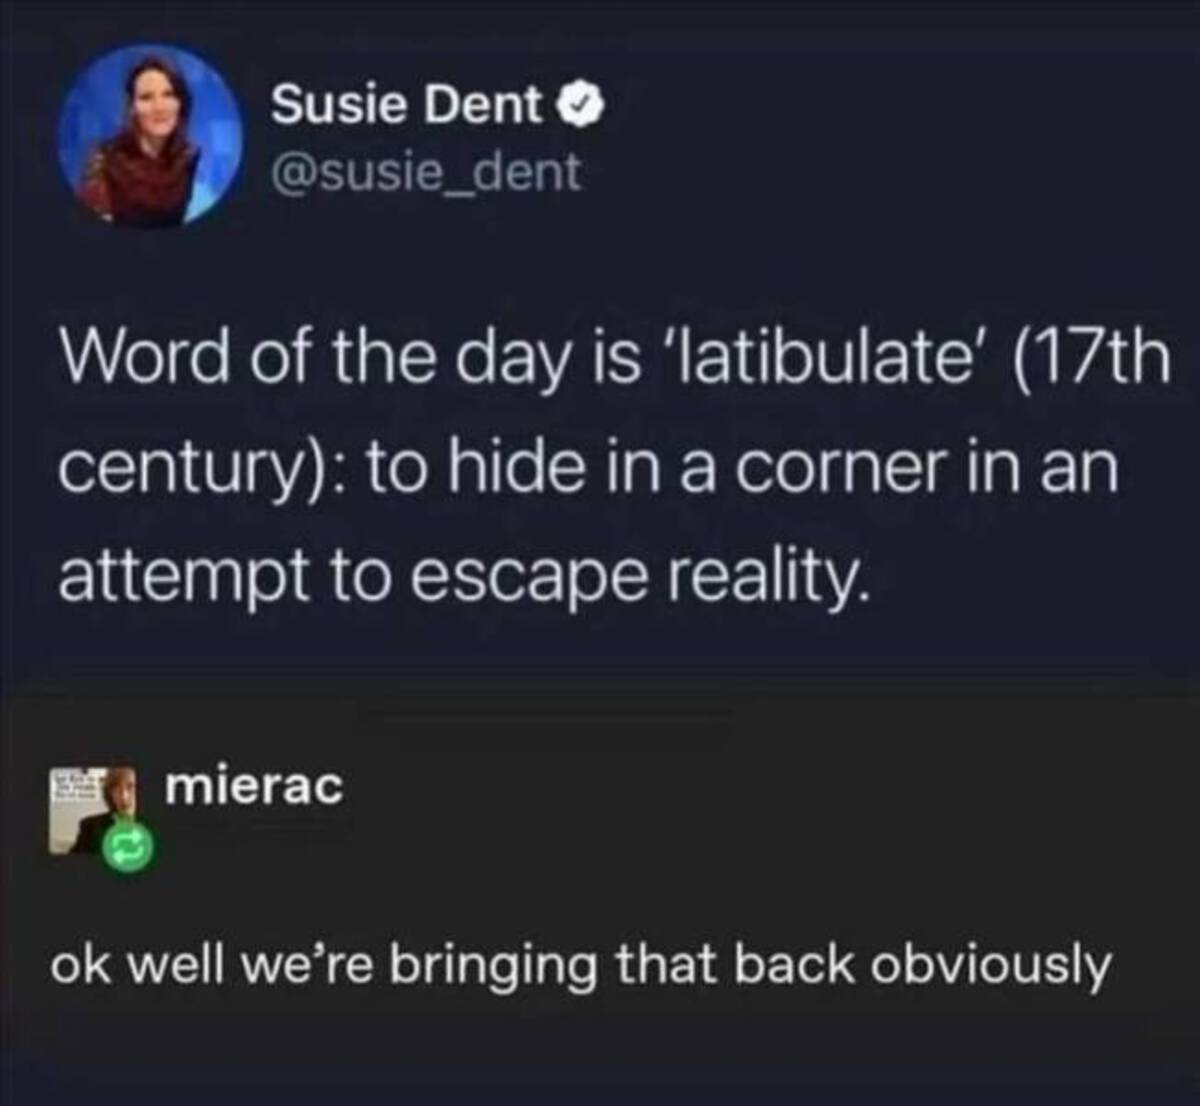 Meme - Susie Dent>> Word of the day is 'latibulate' 17th century to hide in a corner in an attempt to escape reality. mierac ok well we're bringing that back obviously